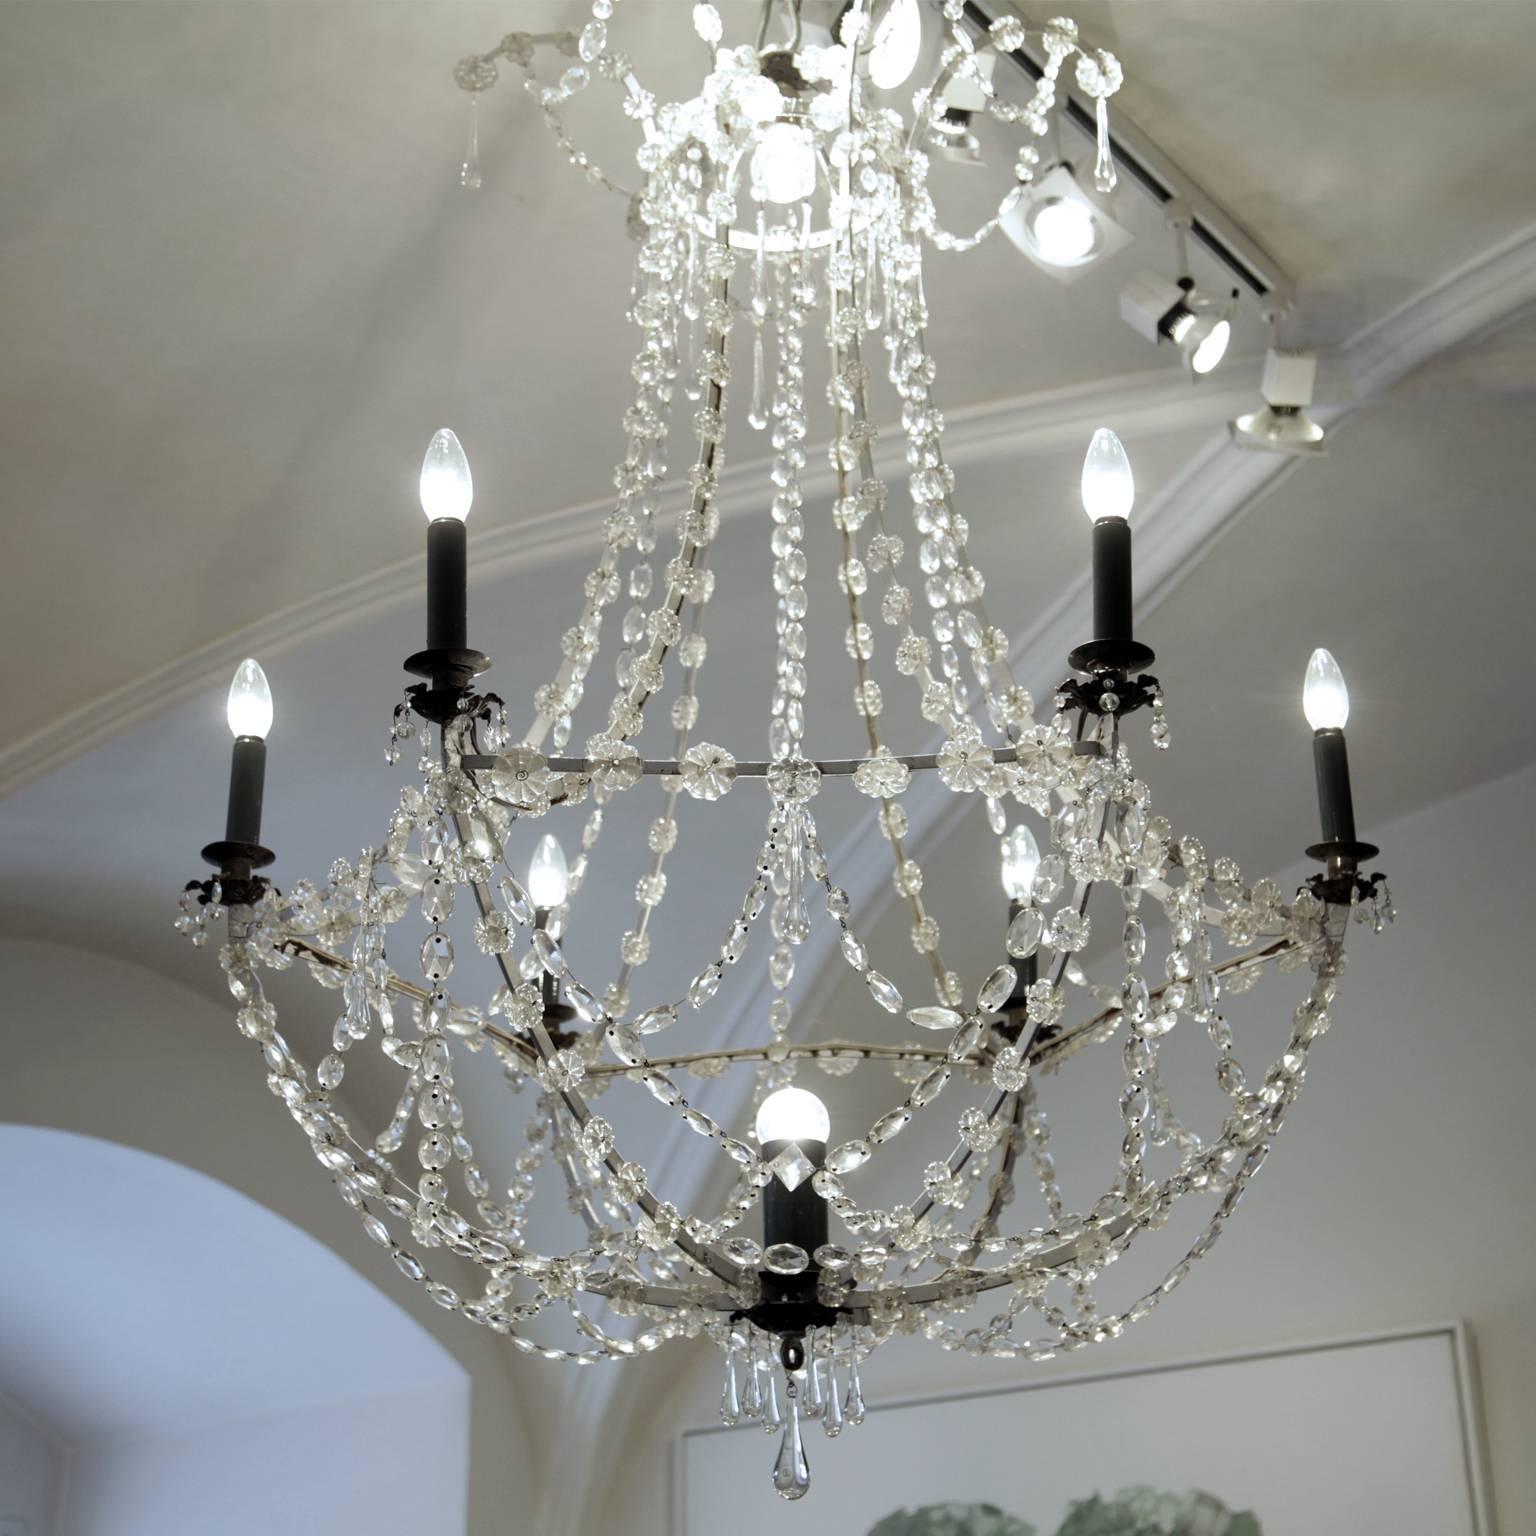 Glass chandelier with six lights around the gallery and one in the basket. The crown is decorated with hanging droplets while the basket ends in a droplet-shaped final. The candle slips are all black, which provides a nice contrast to the glass